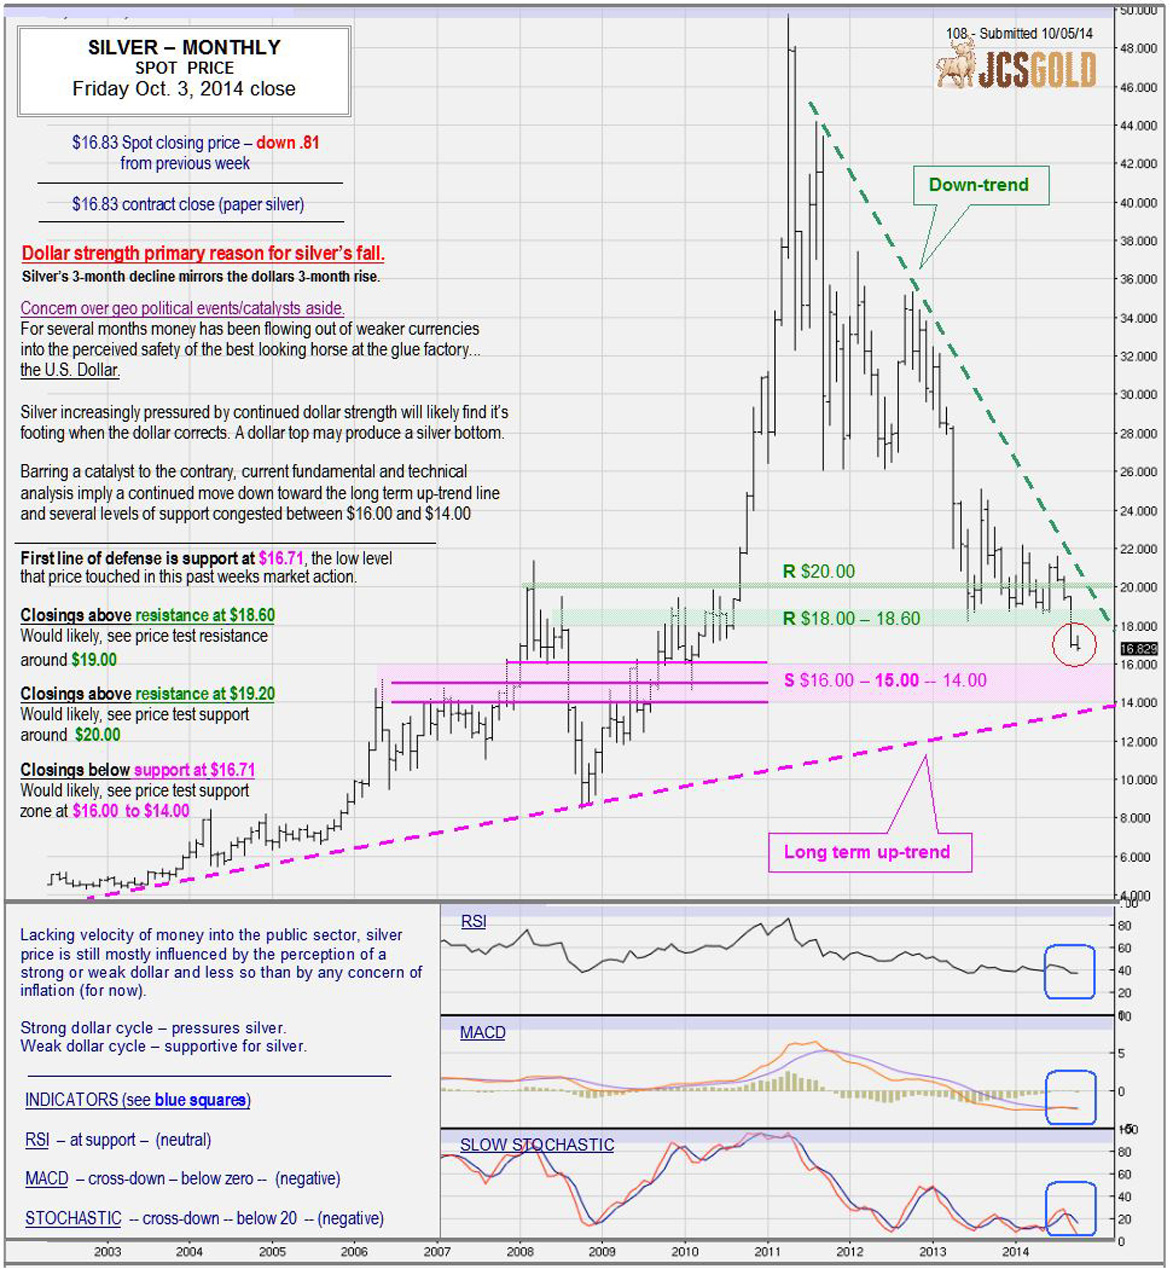 Oct. 3, 2014 chart & commentary